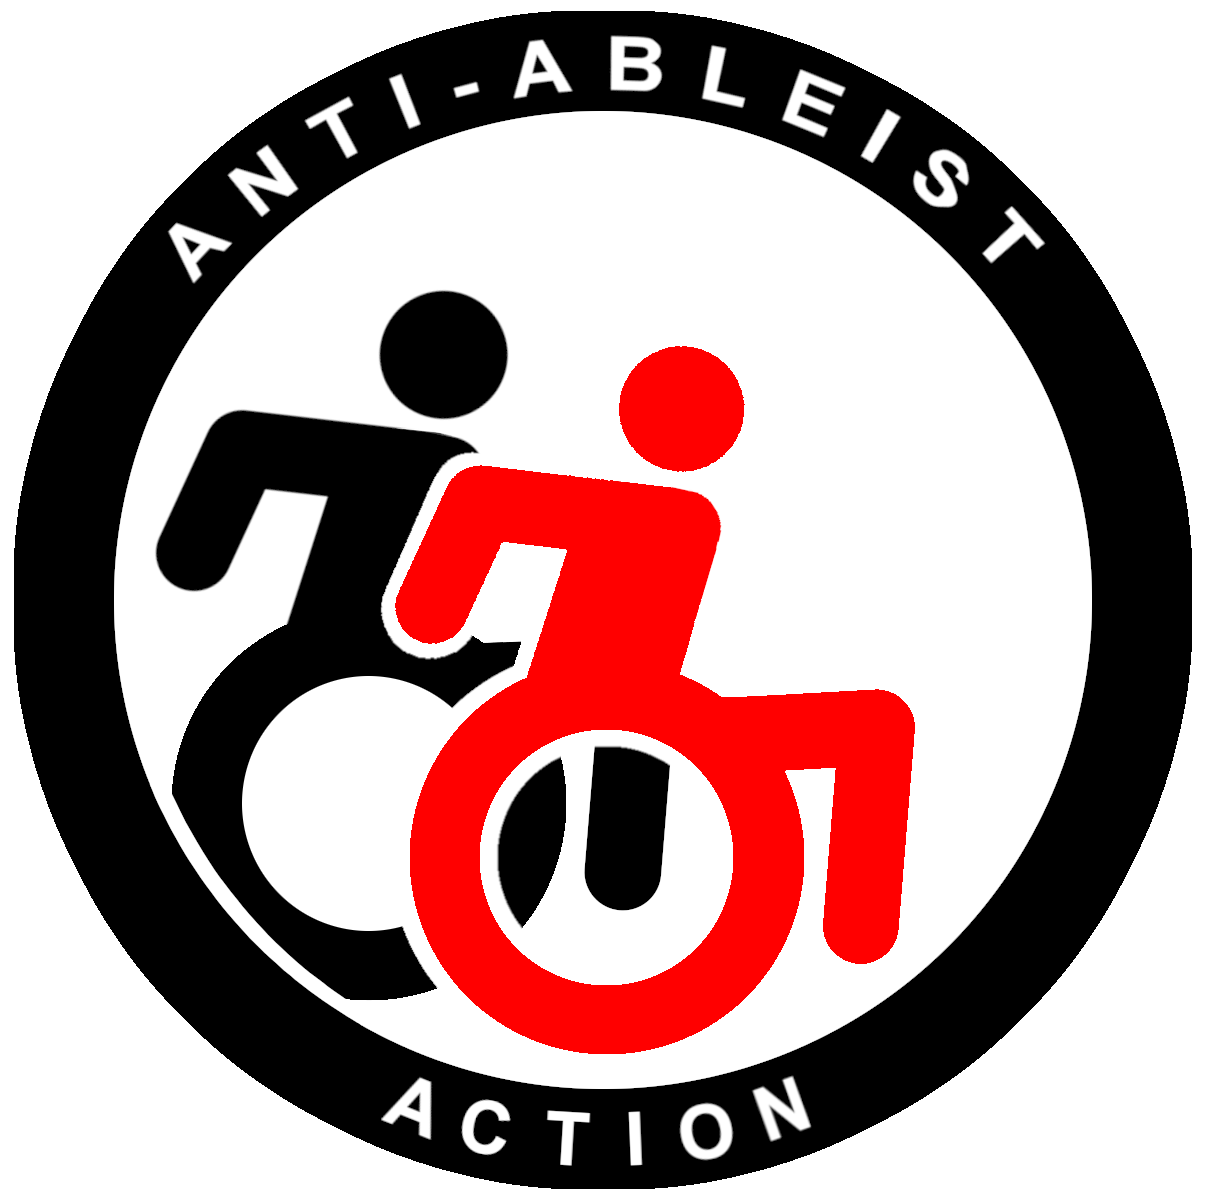 Like Antifa-symbol, round shape, red an black. But ohter Text than bei Antifa-Logo: anti-ableist-action and with 2 people in a wheelchair instead of the red und black flags